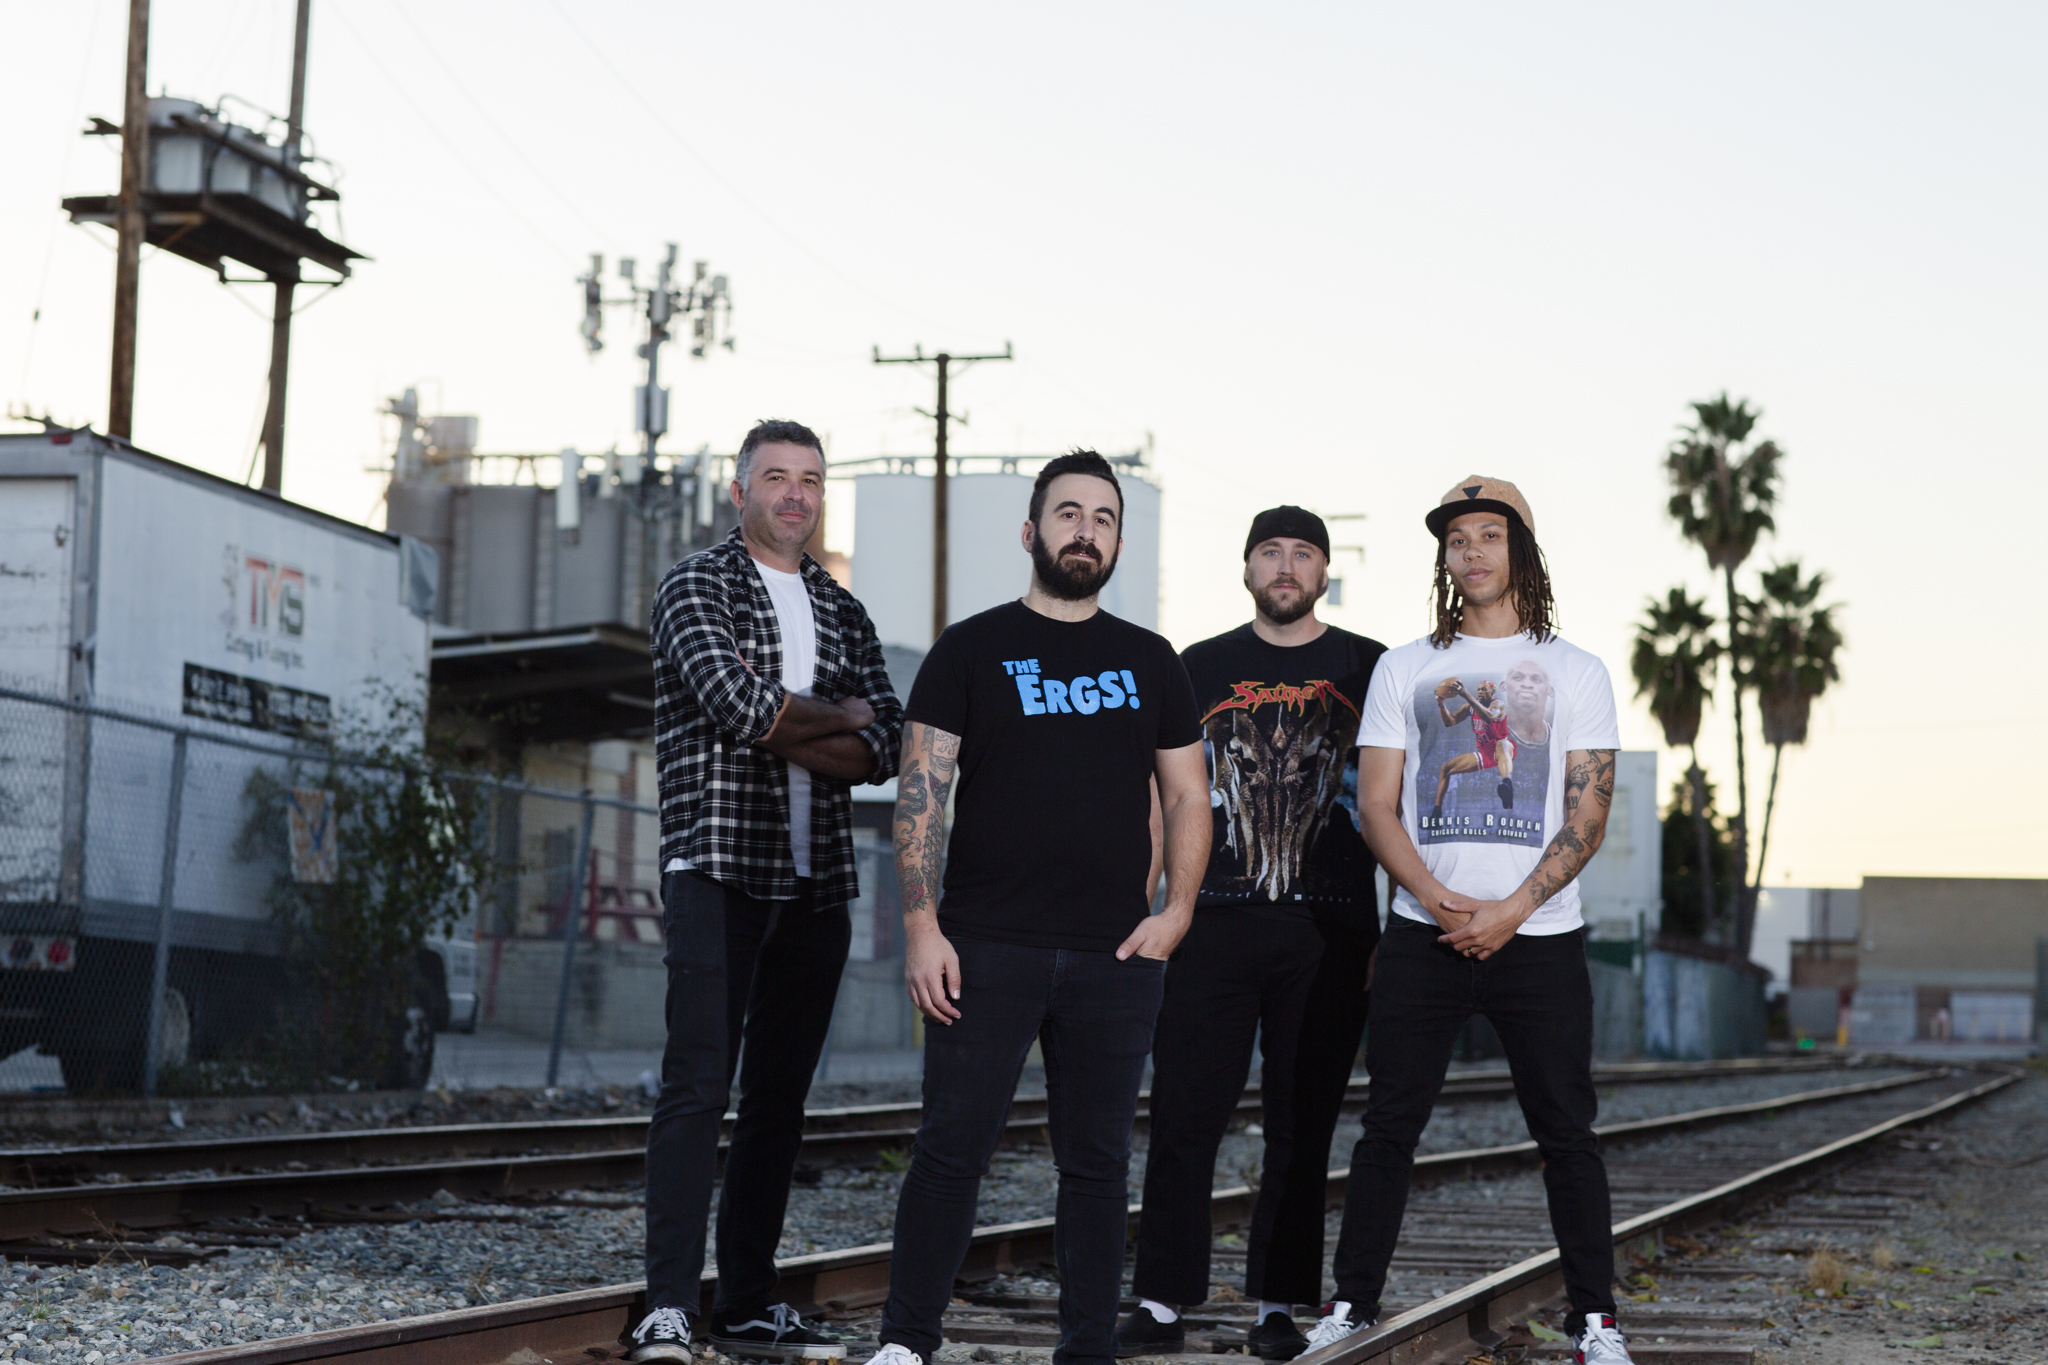 A photo of the punk rock band Stoke Signals taken in Vernon, California. The band is standing on railroad tracks. The photo was shot by Adam Stanzak.